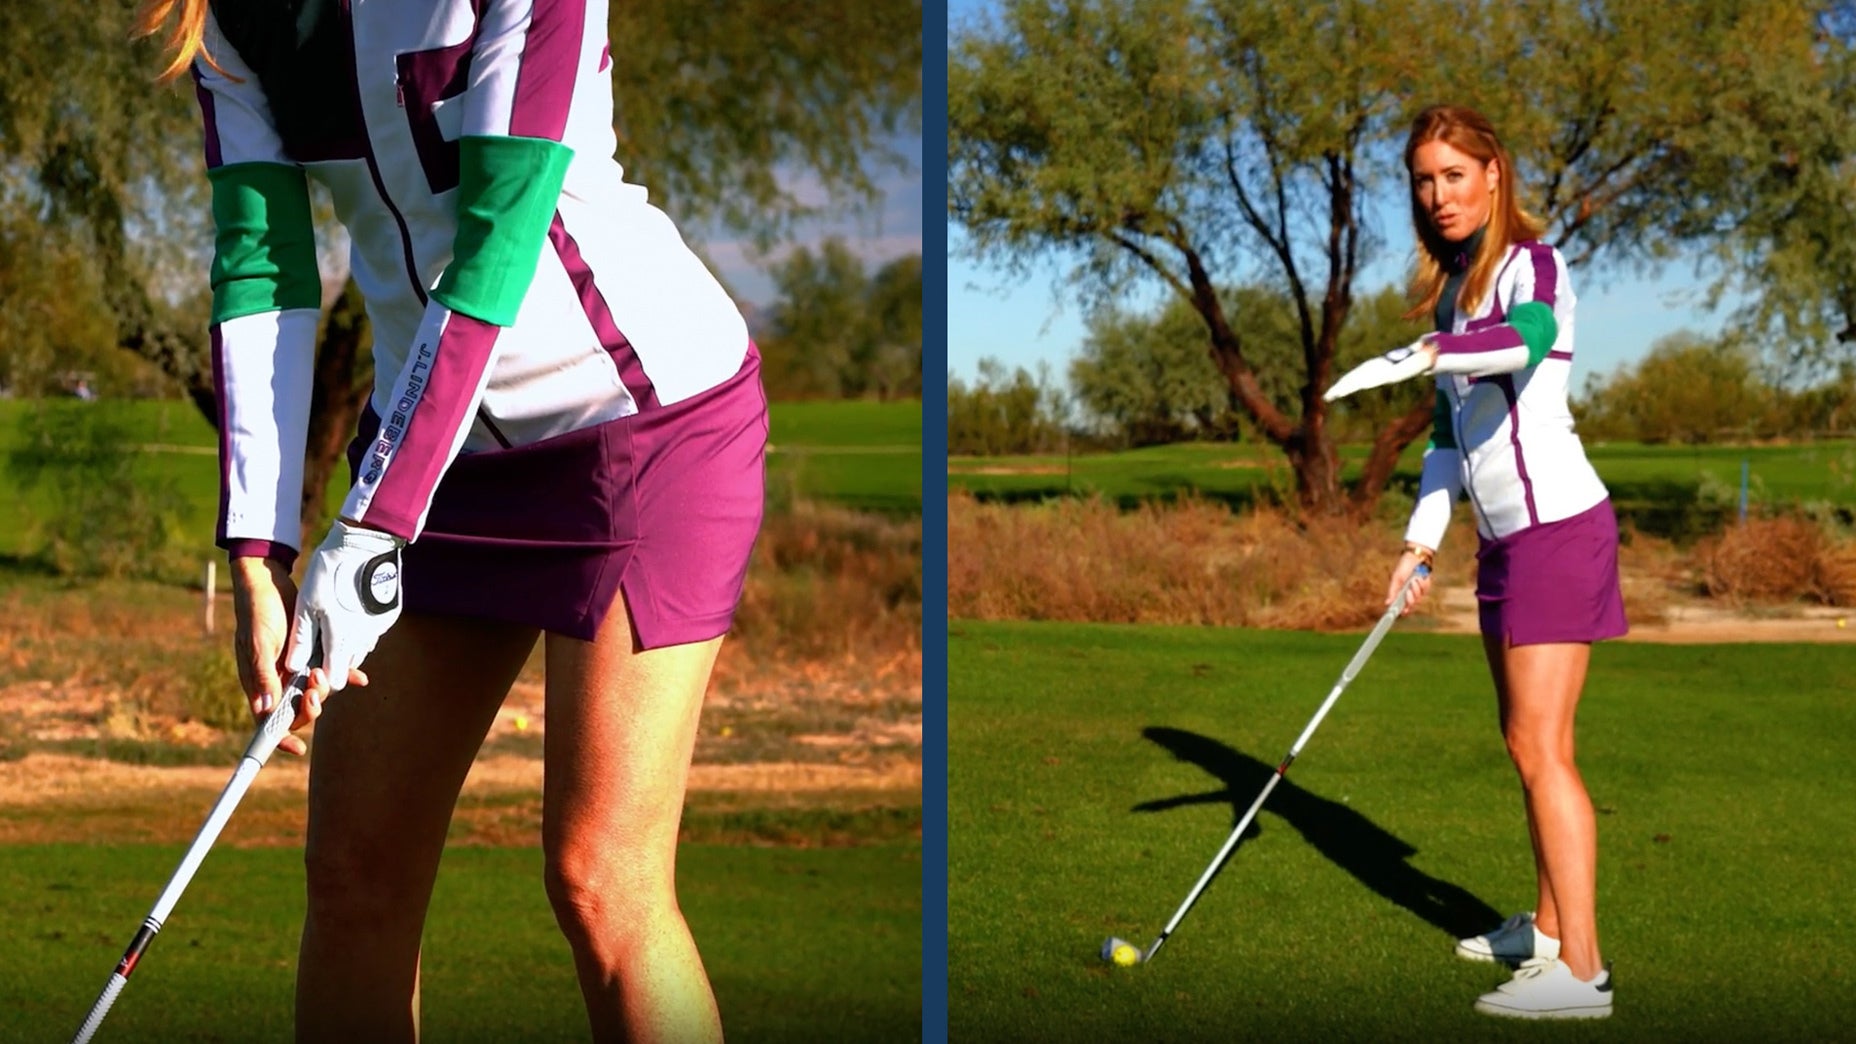 GOLF Top 100 Teacher Trillium Rose gives her tips on how to hit a ball that's above your feet, with a focus on adjusting your grip